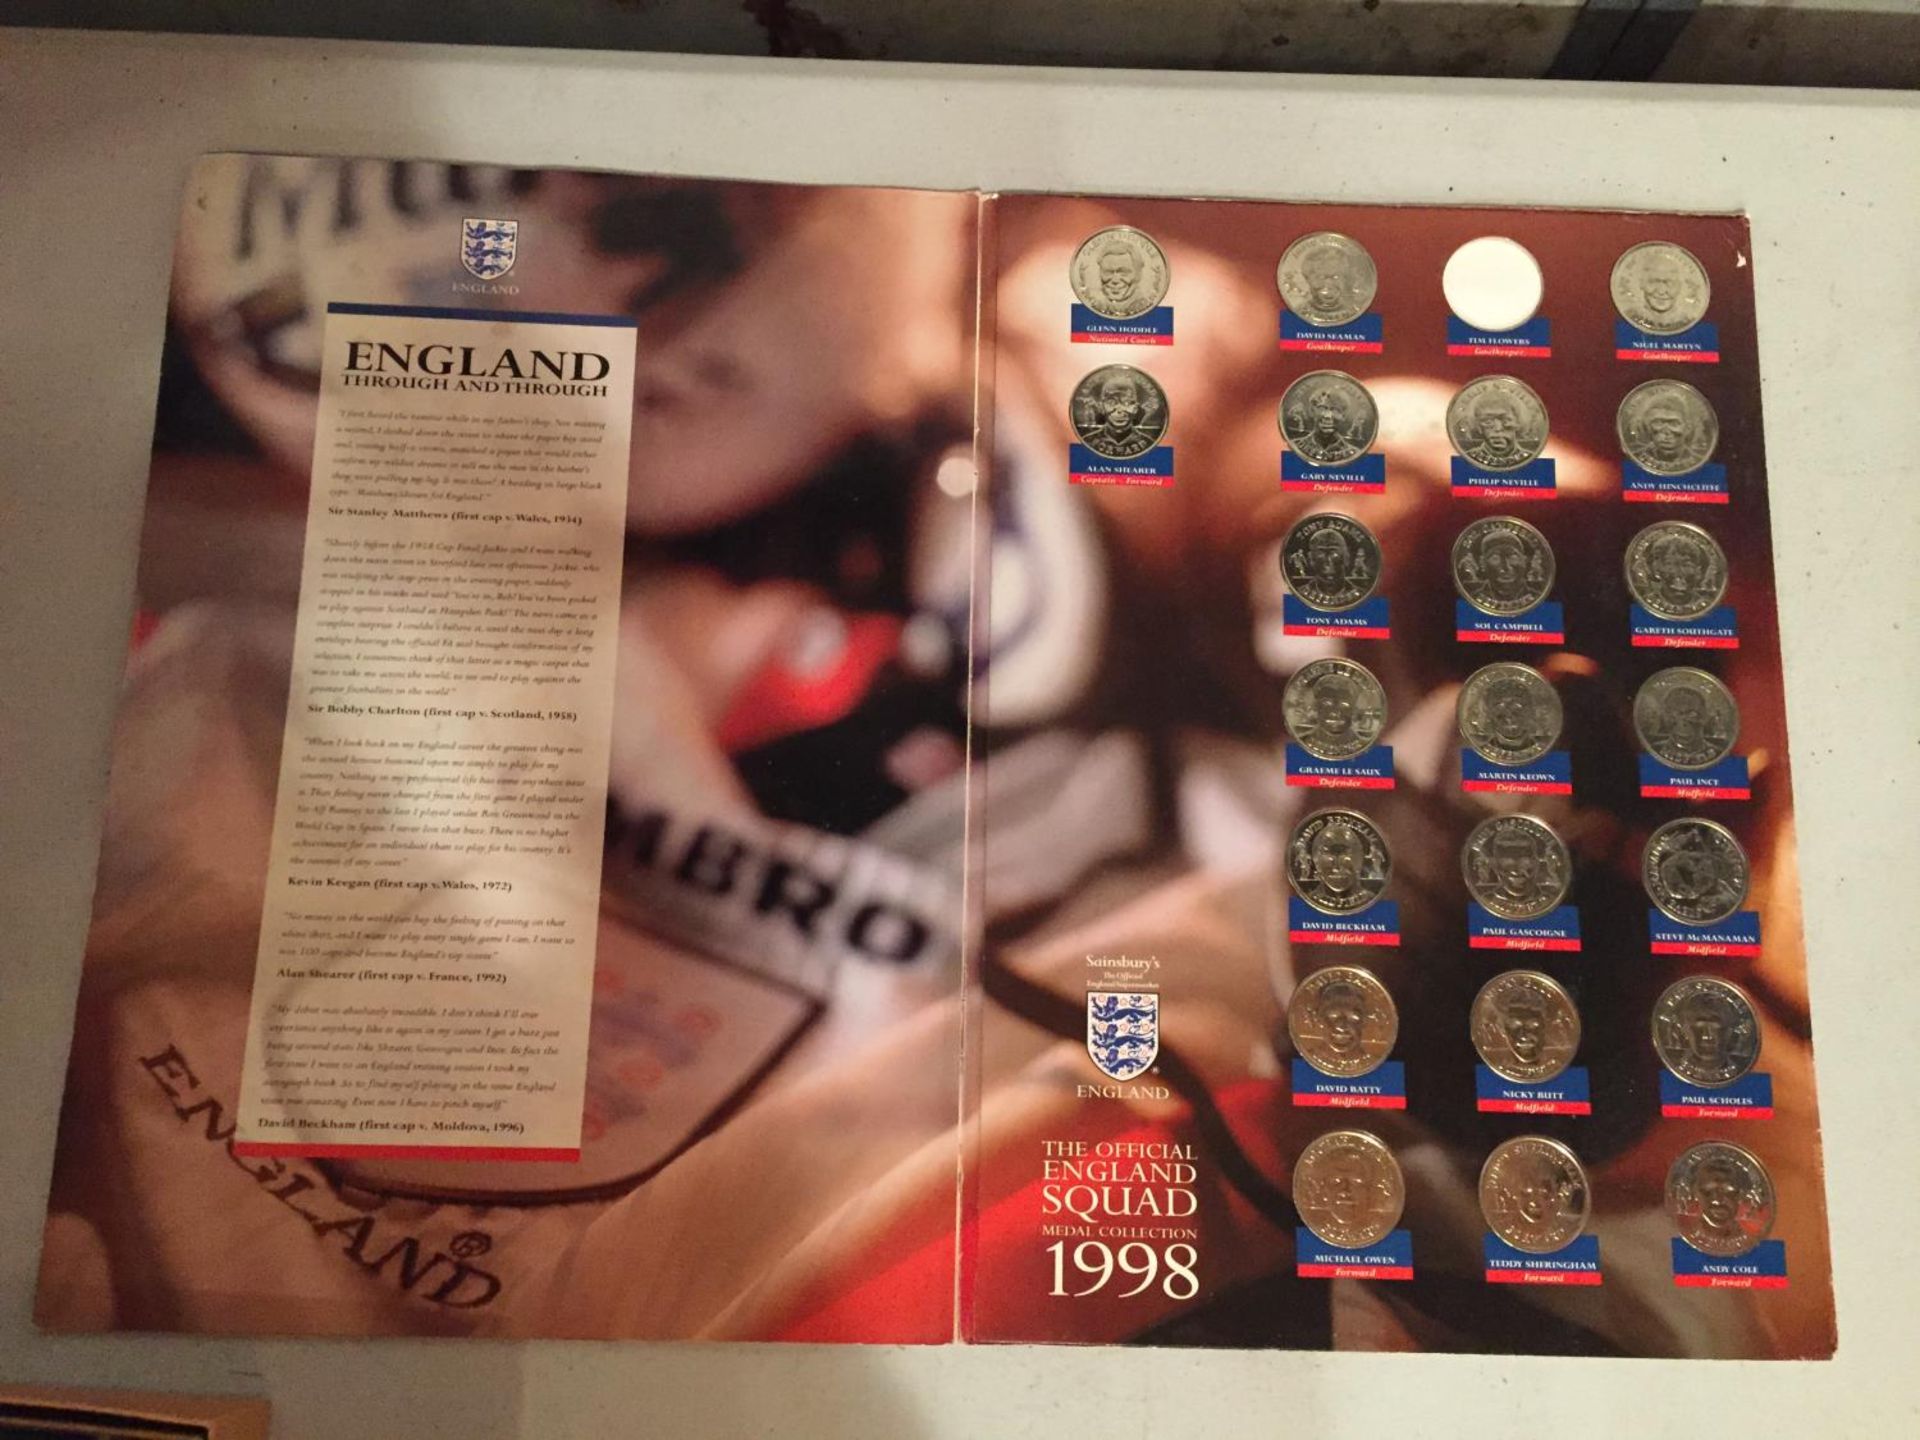 THE OFFICIAL ENGLAND SQUAD 1998 MEDAL COLLECTION - Image 3 of 3